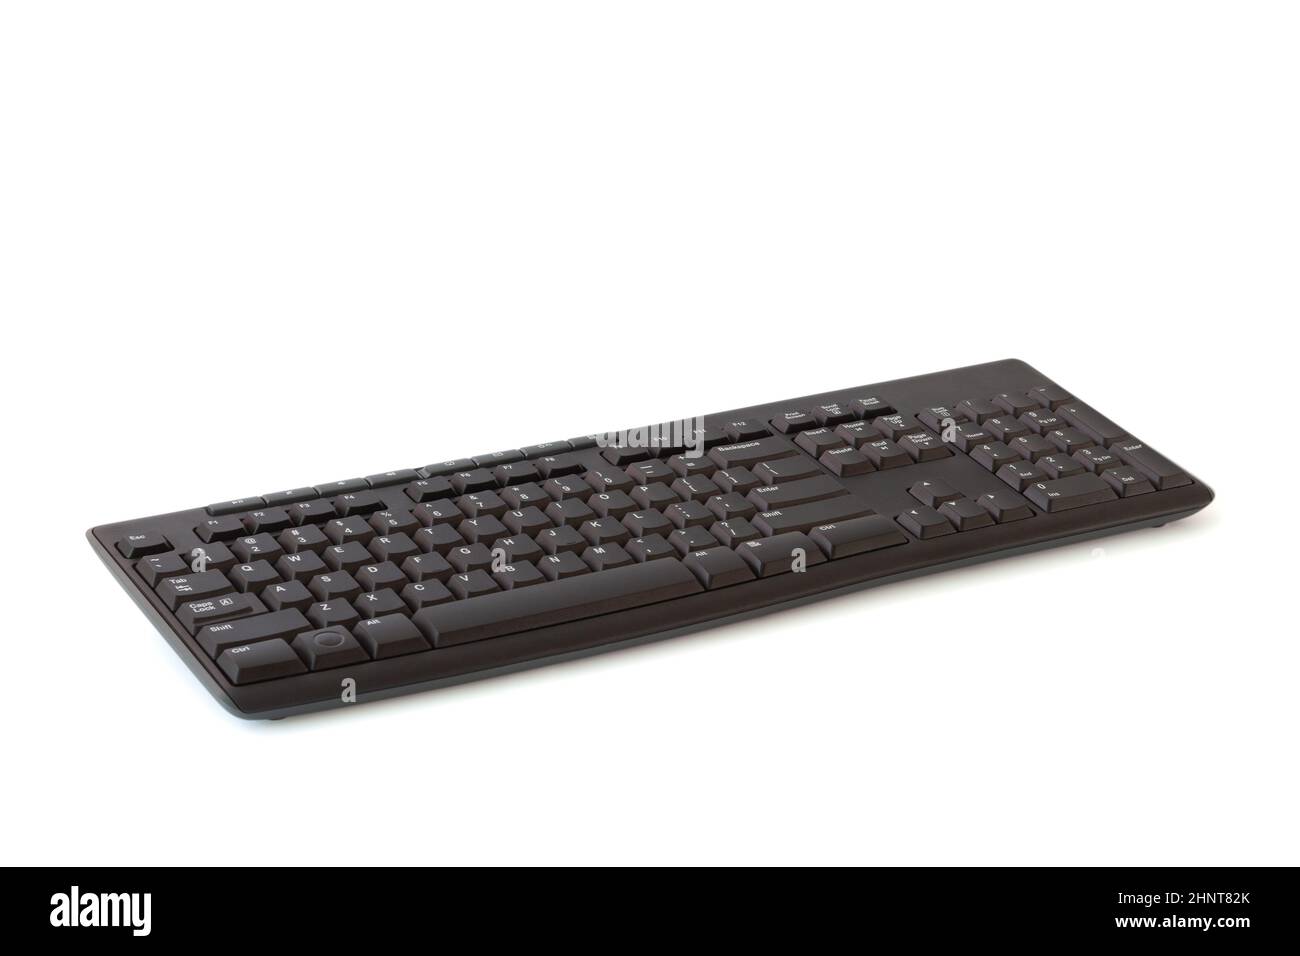 Black color wireless keyboard with US English layout Stock Photo